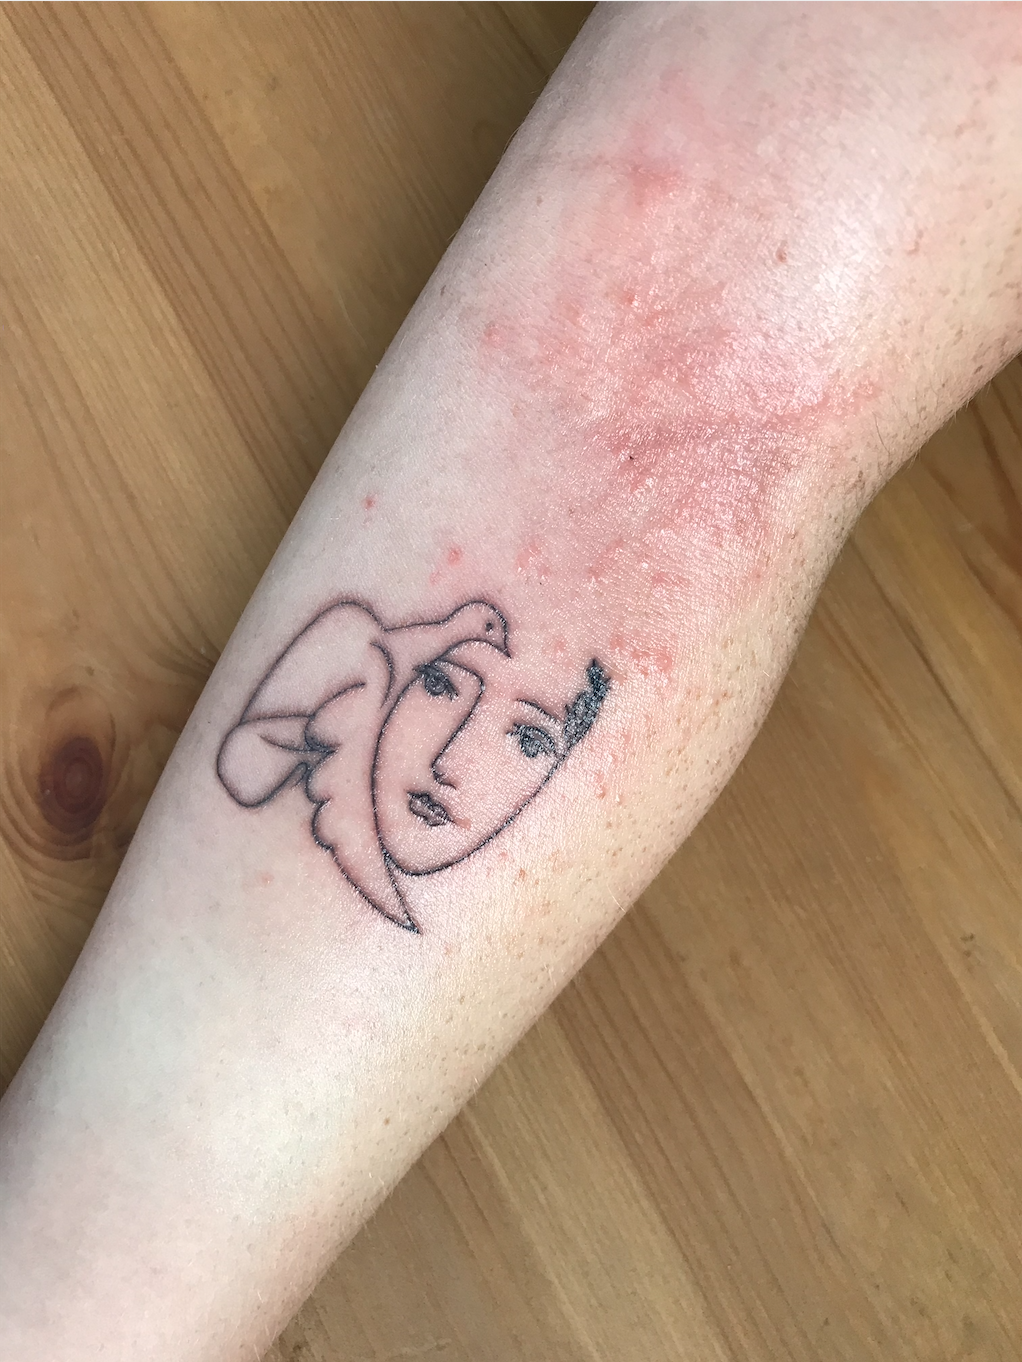 Is it normal to get a rash after a tattoo